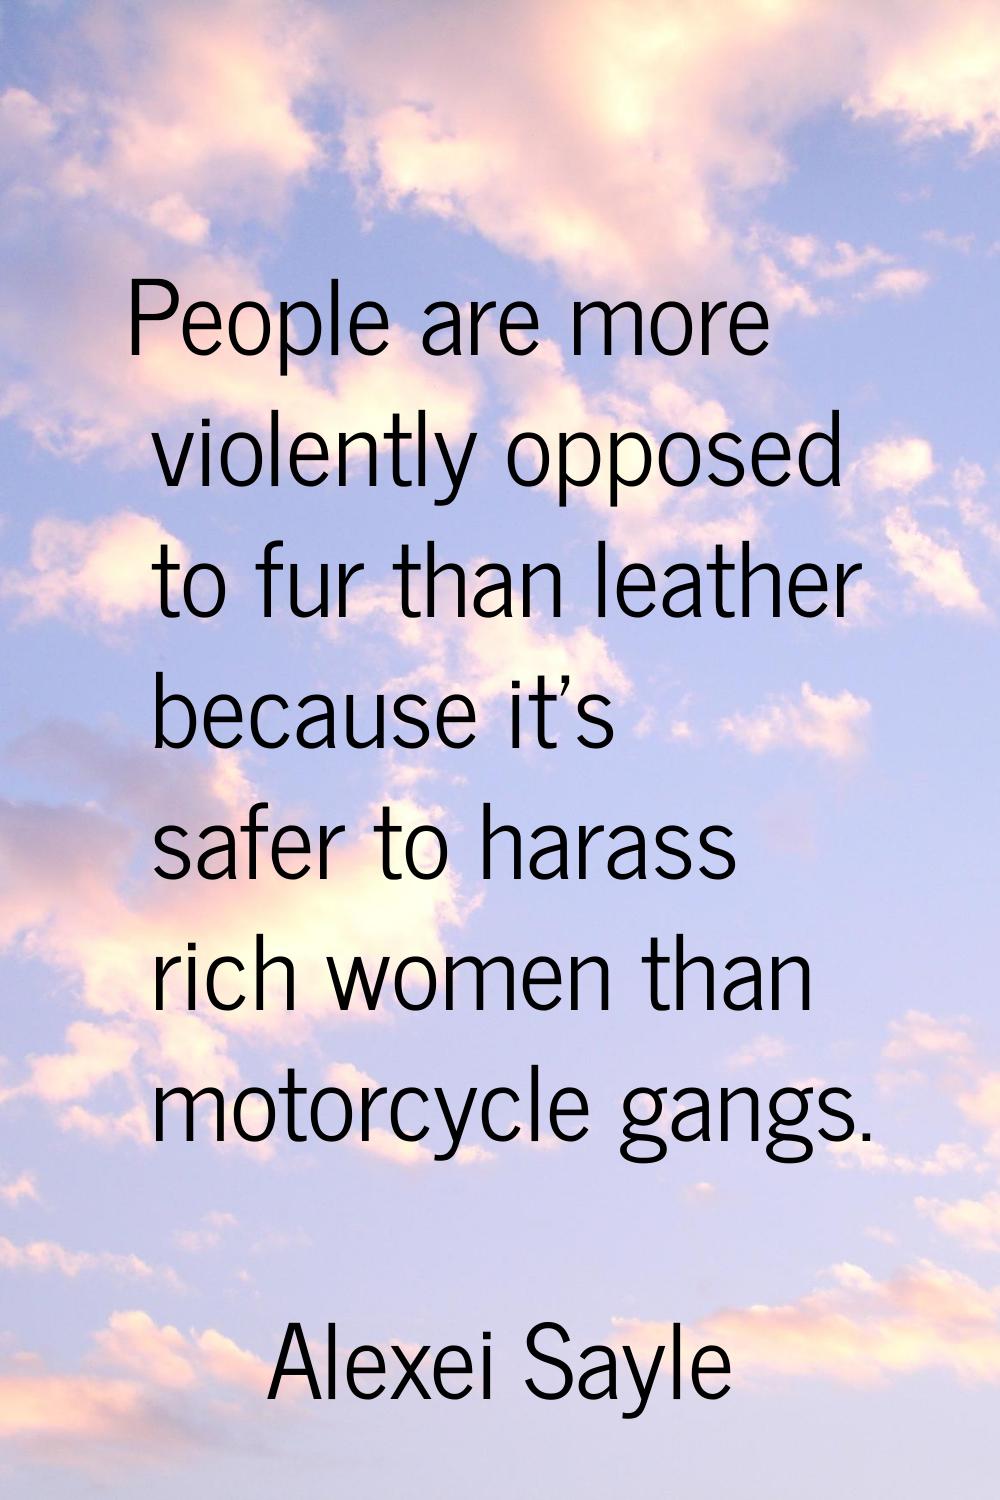 People are more violently opposed to fur than leather because it's safer to harass rich women than 